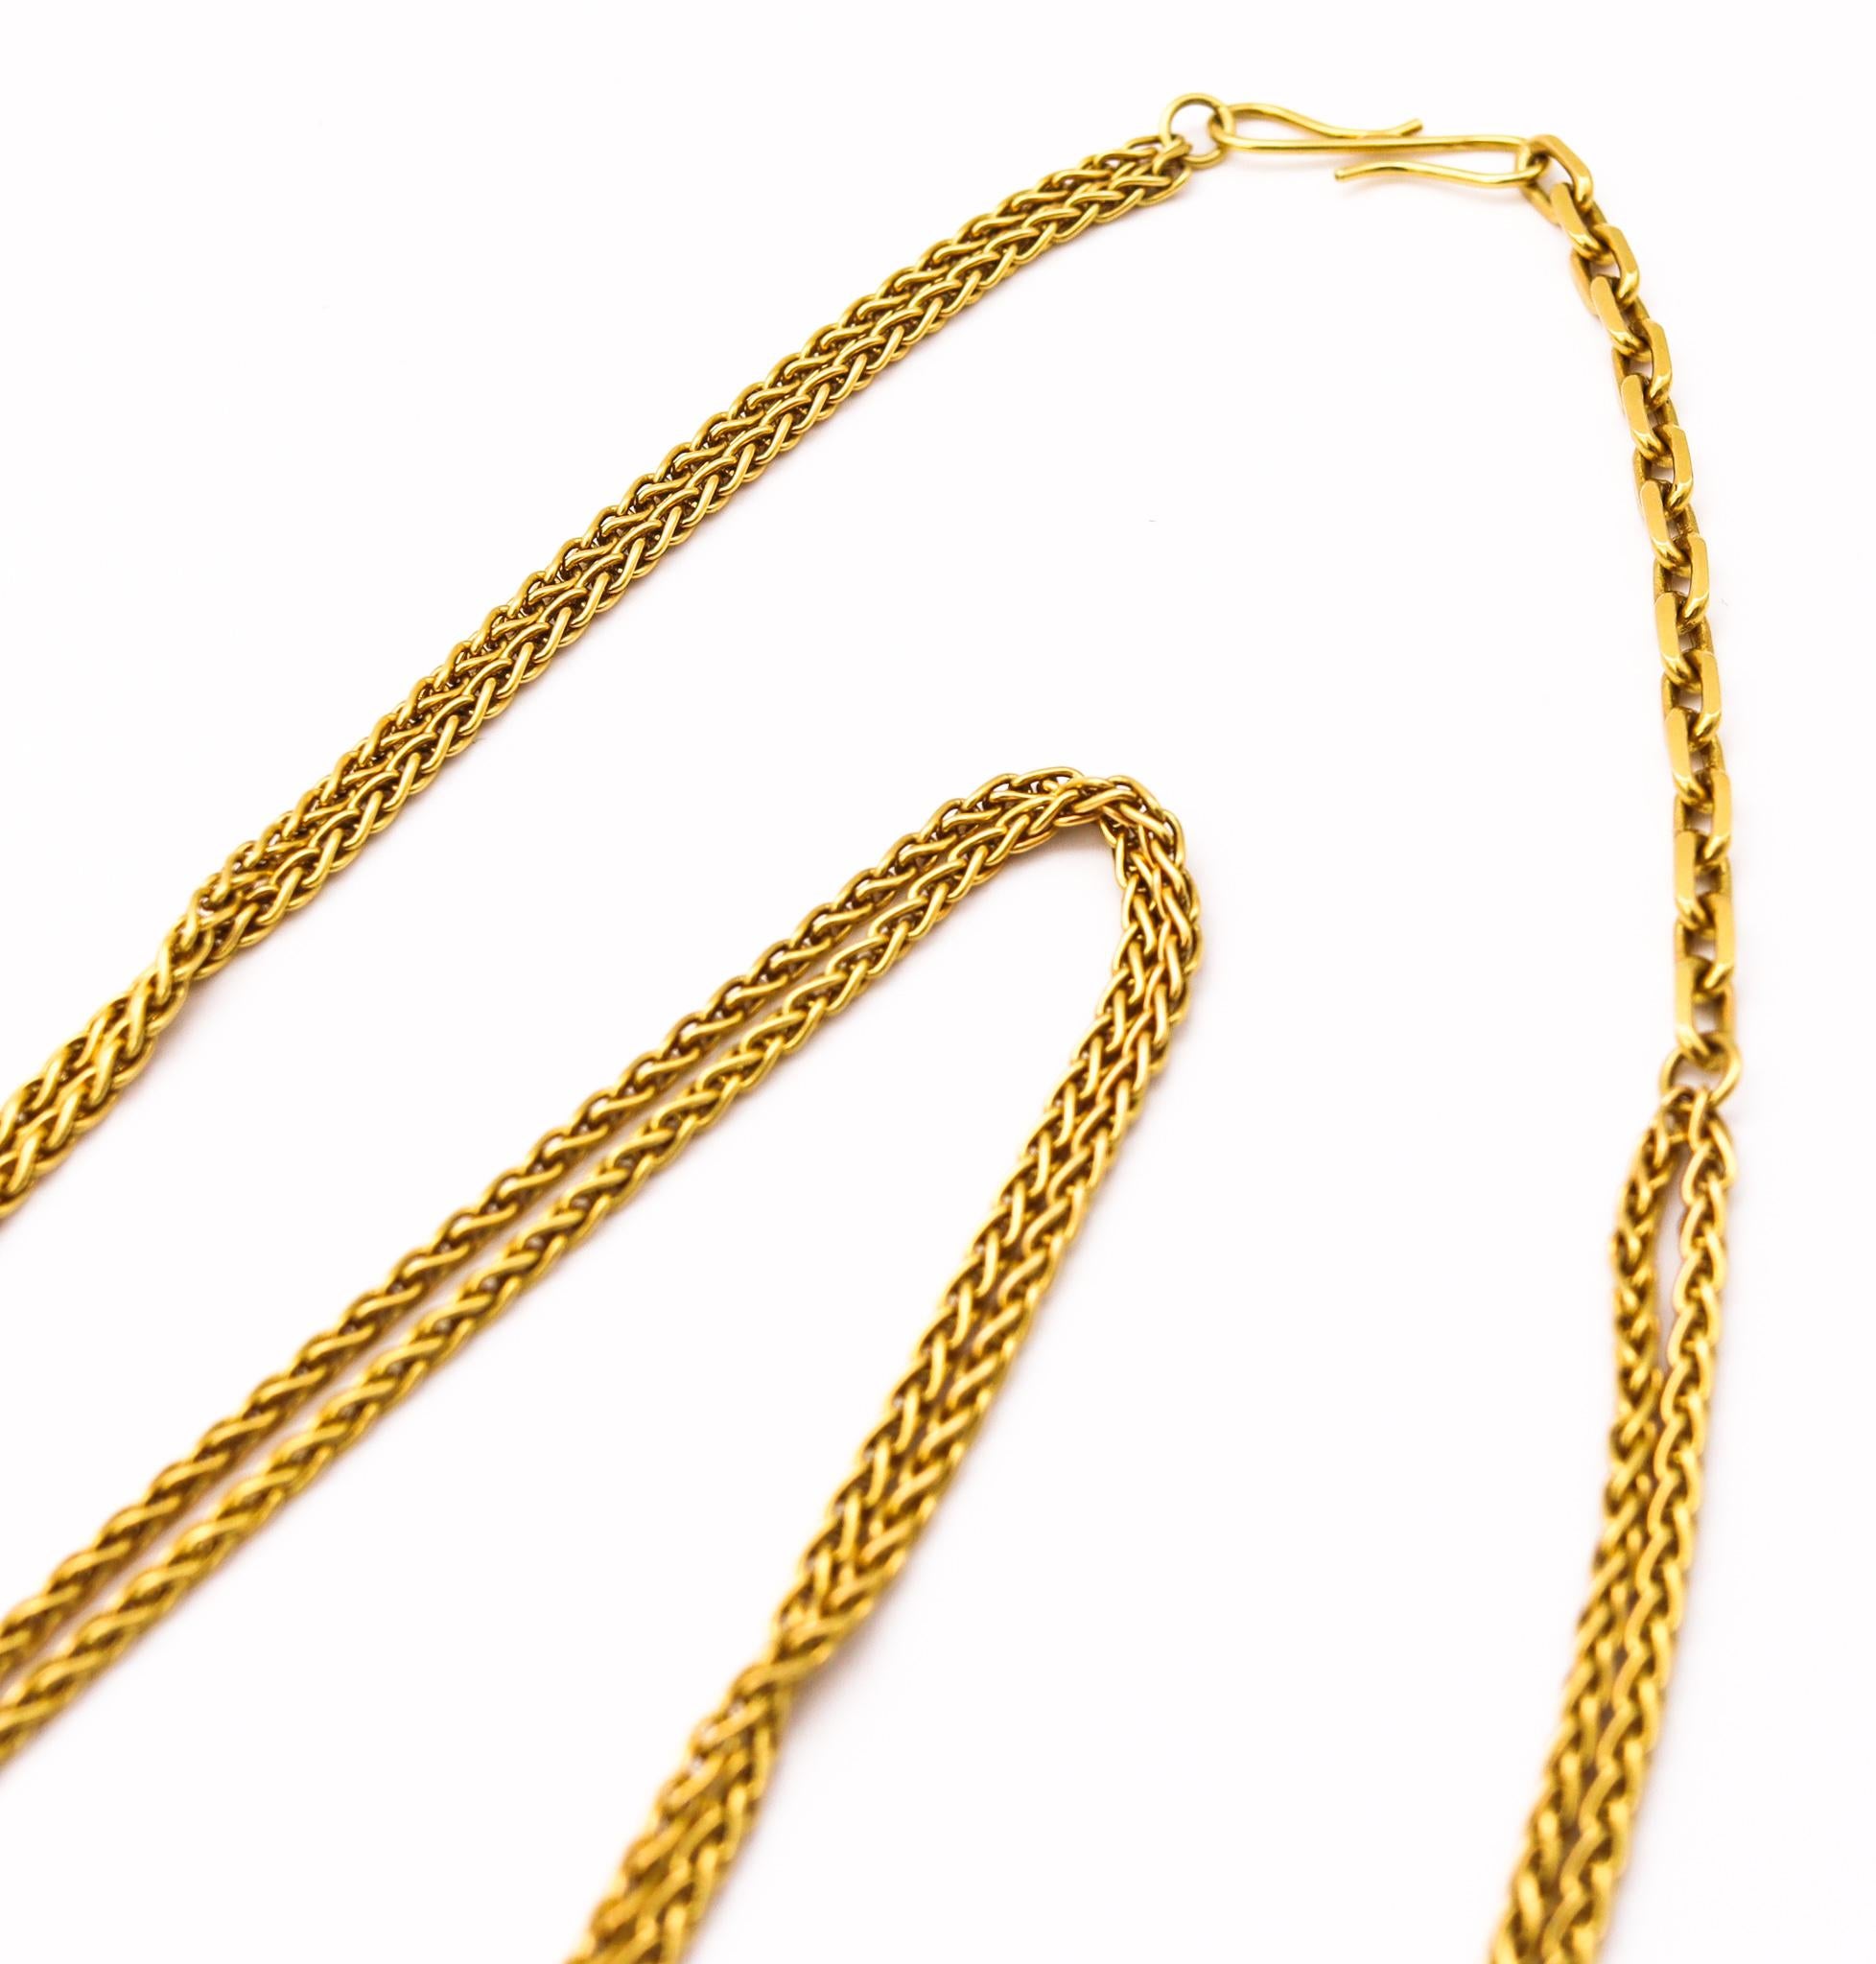 H Stern Diane von Furstenberg Long Necklace 18 Kt Gold with 22.45 Cts Aquamarine In Excellent Condition For Sale In Miami, FL